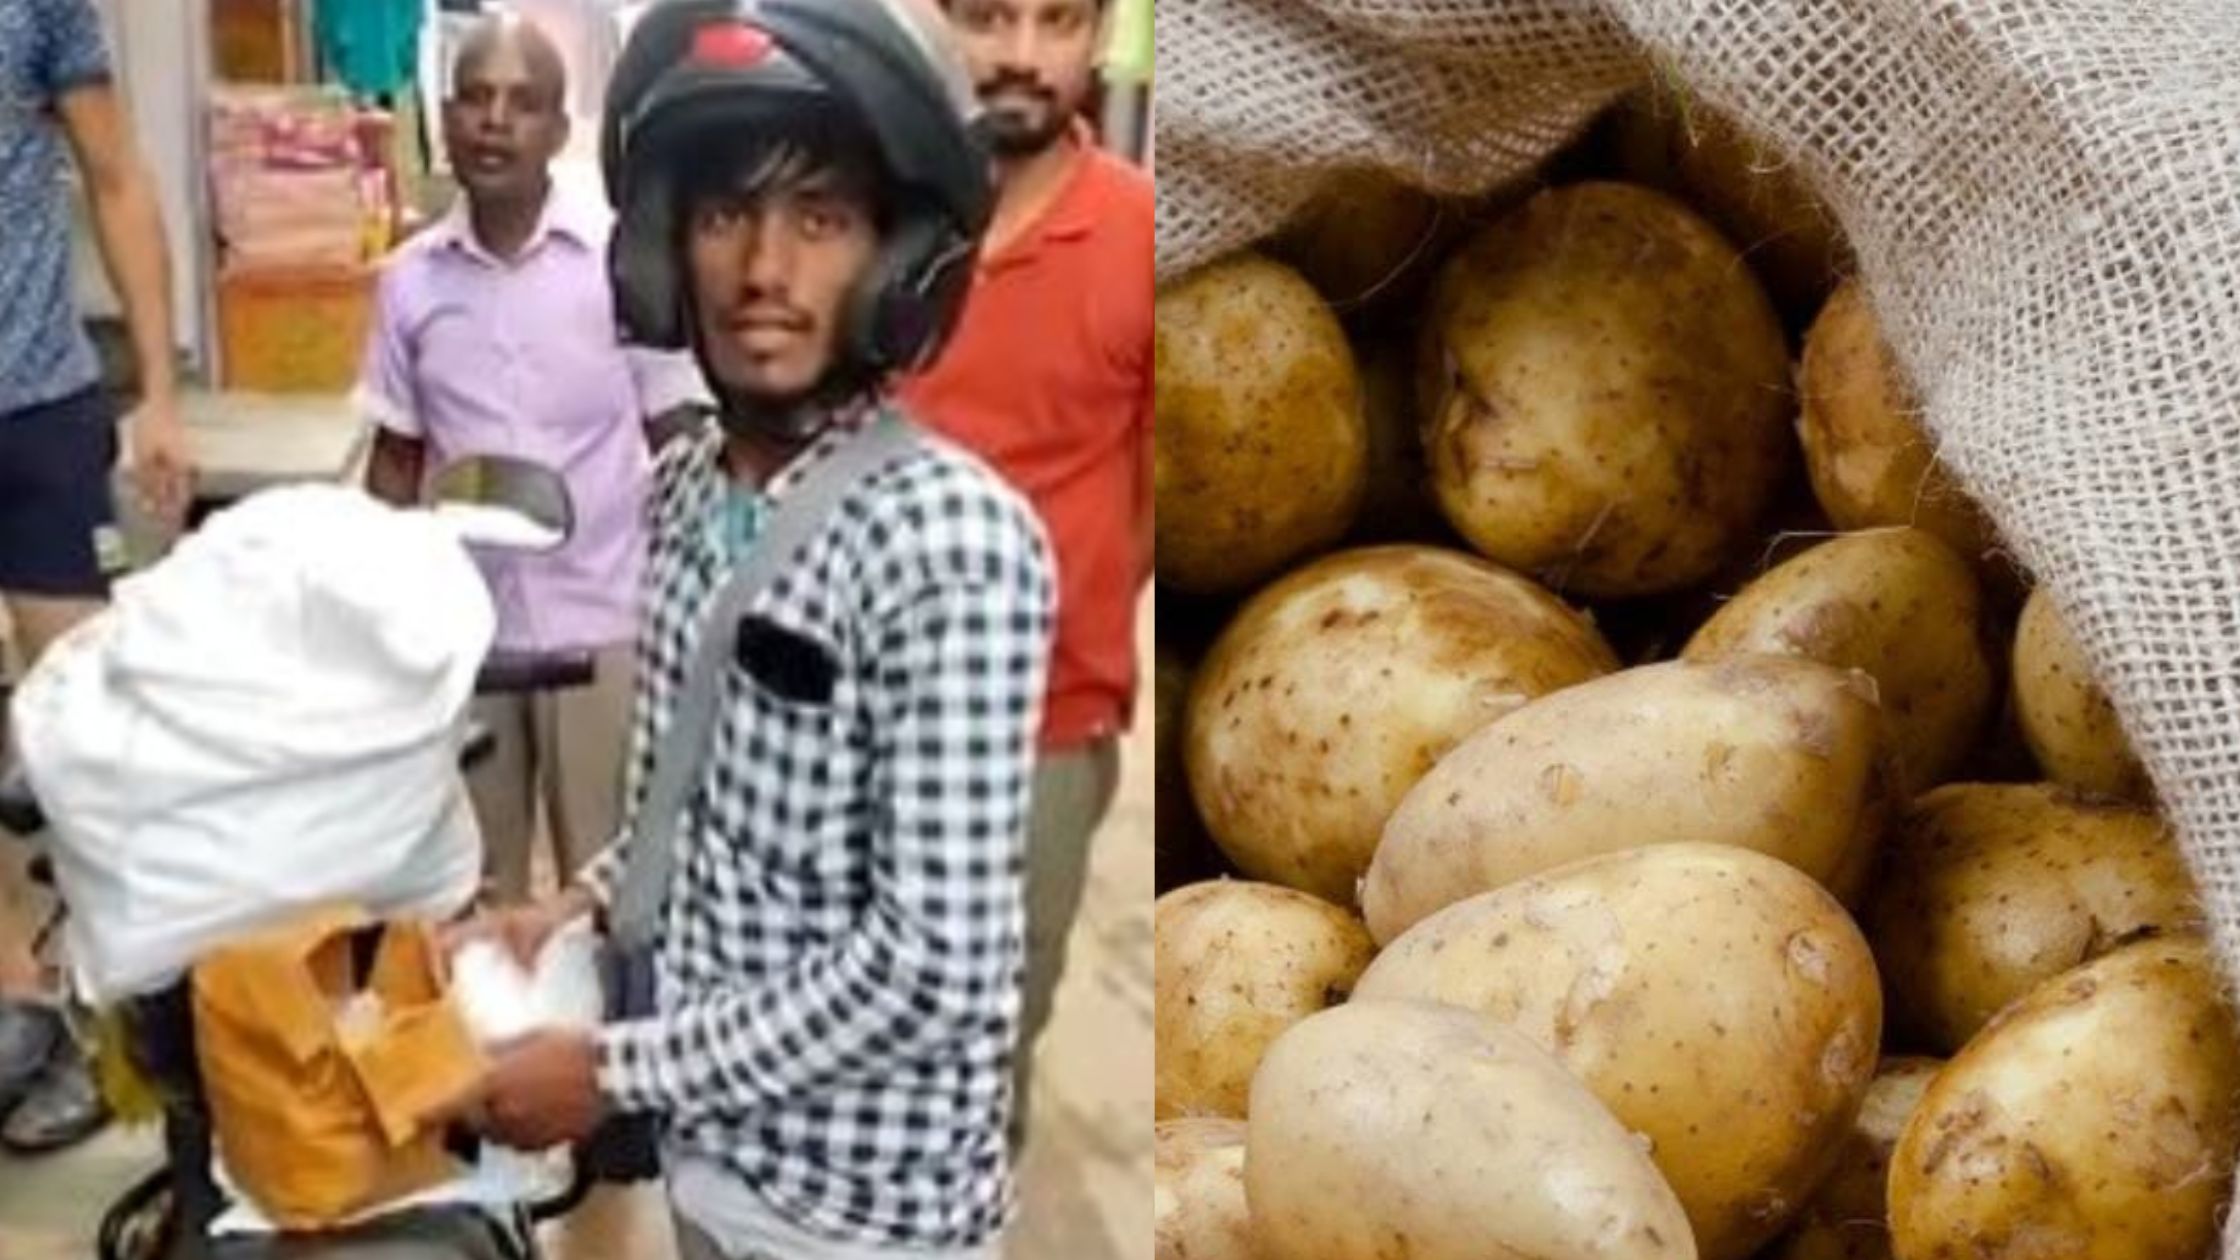 potato came instead of drone in online shopping